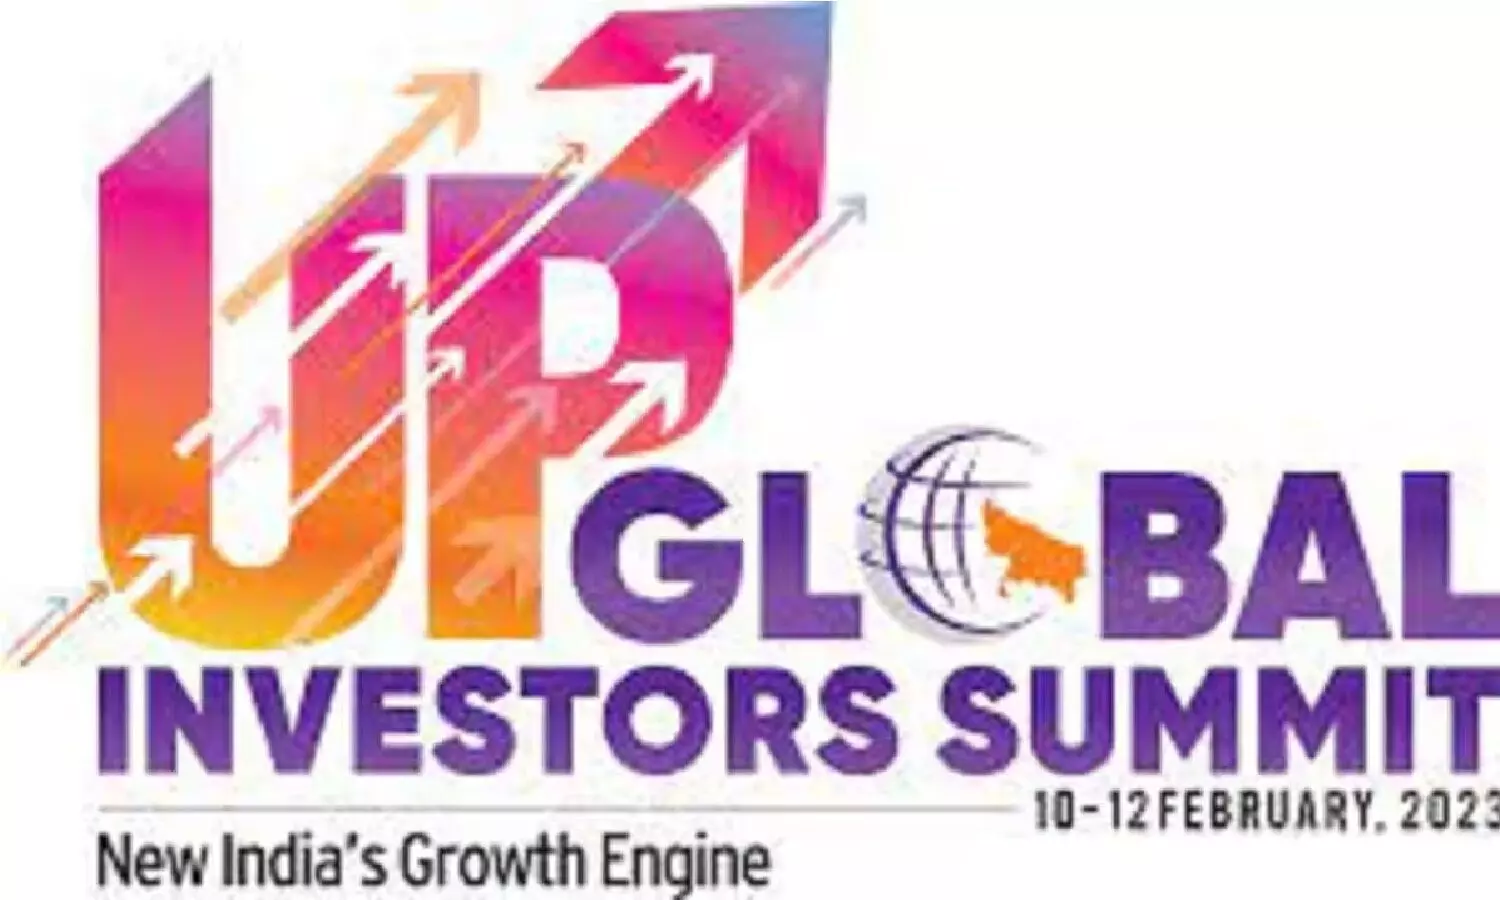 UP Global Investors Summit in Lucknow: